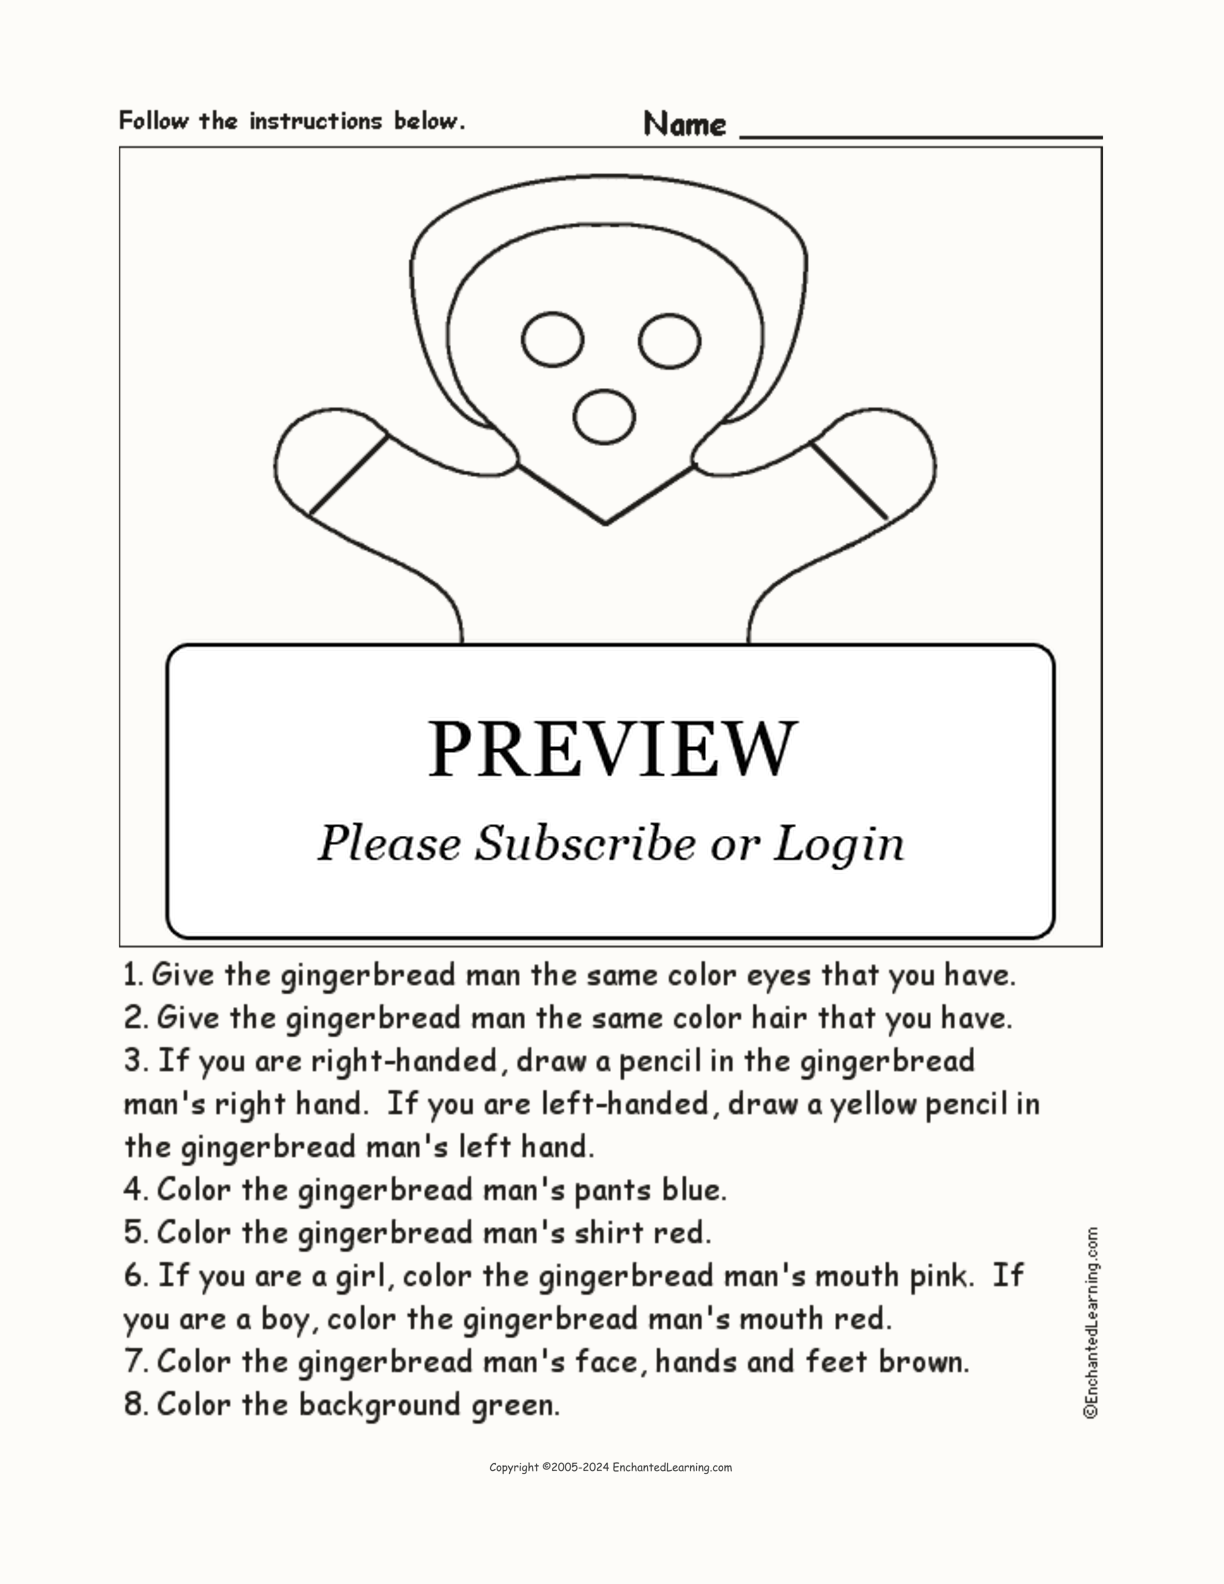 The Gingerbread Man - Follow the Instructions interactive worksheet page 1